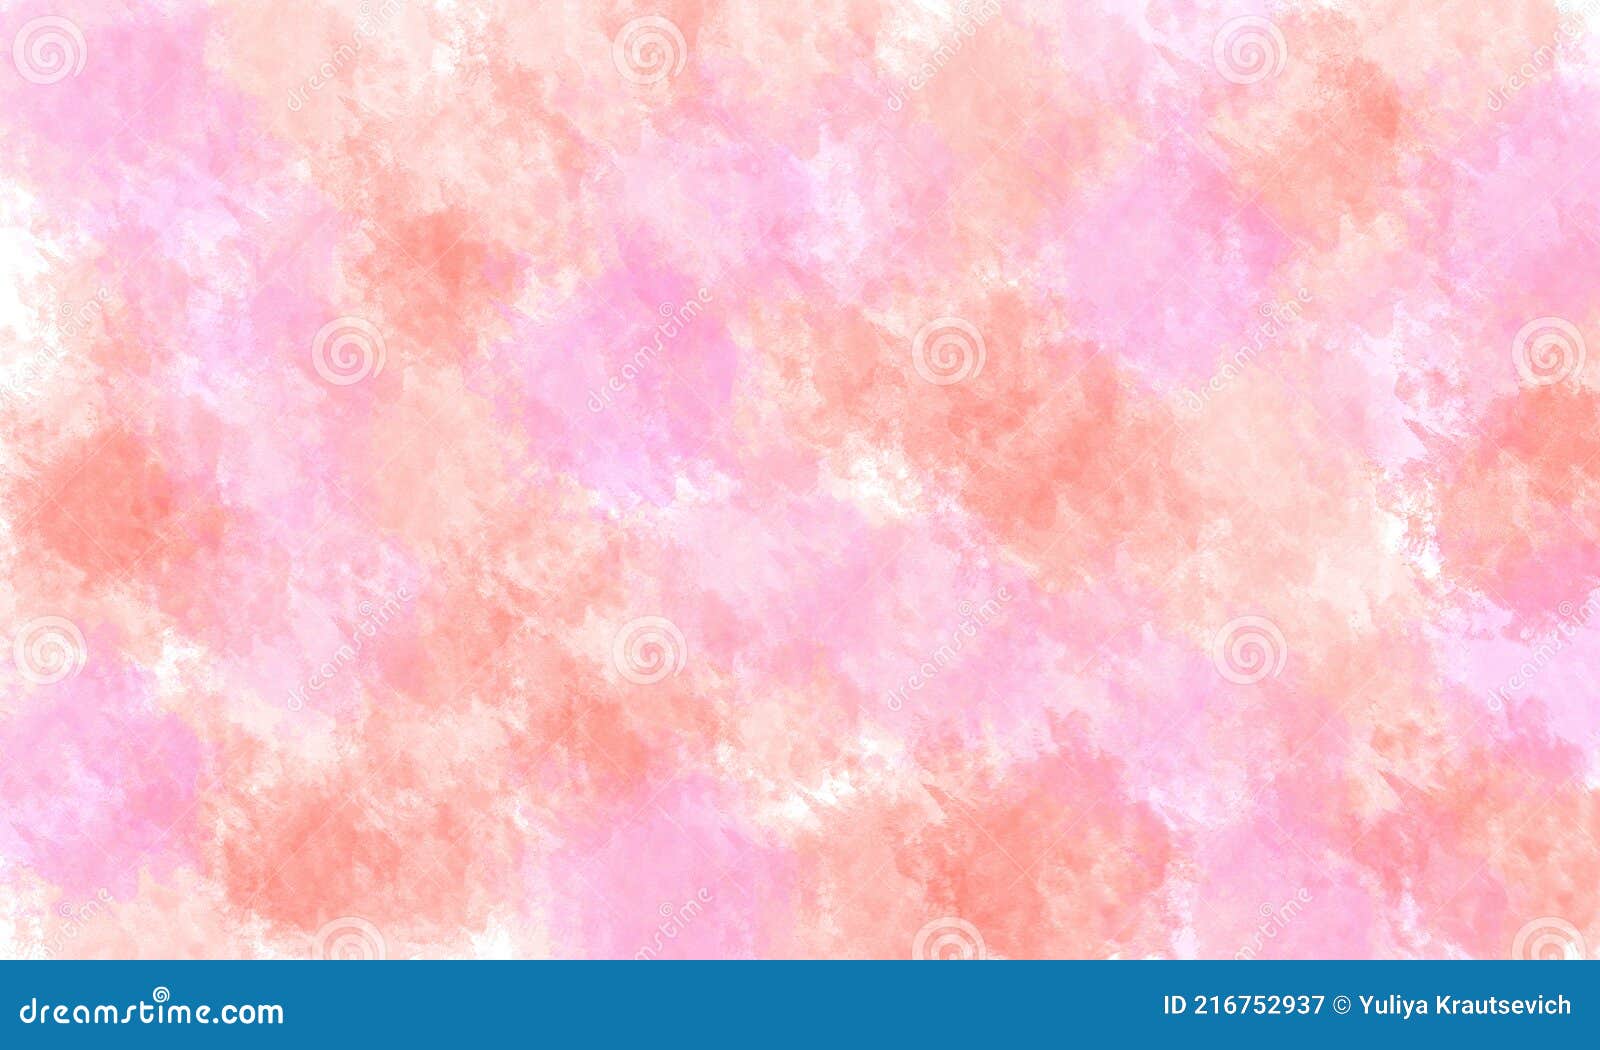 Abstract Modern Pink Background. Tie Dye Pattern Stock Illustration ...